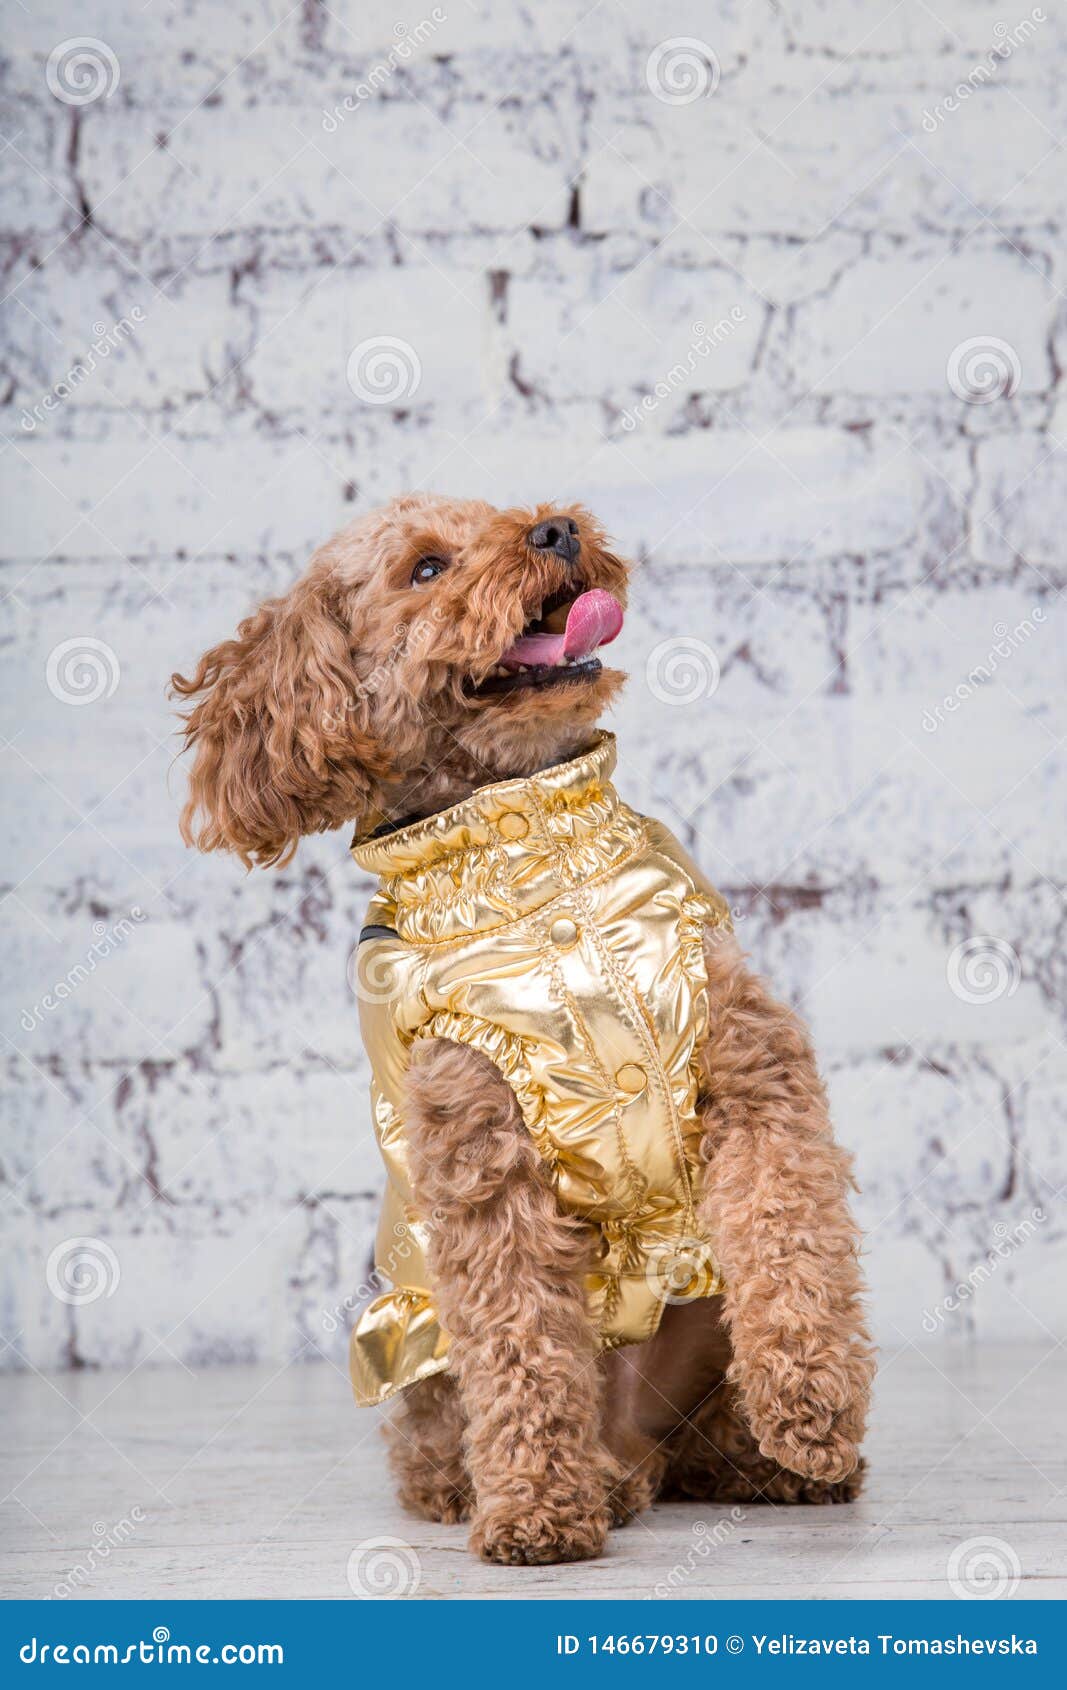 Small Funny Dog Of Brown Color With Curly Hair Of Toy Poodle Breed Posing  In Clothes For Dogs. Subject Accessories And Fashionable Stock Photo  146679310 - Megapixl